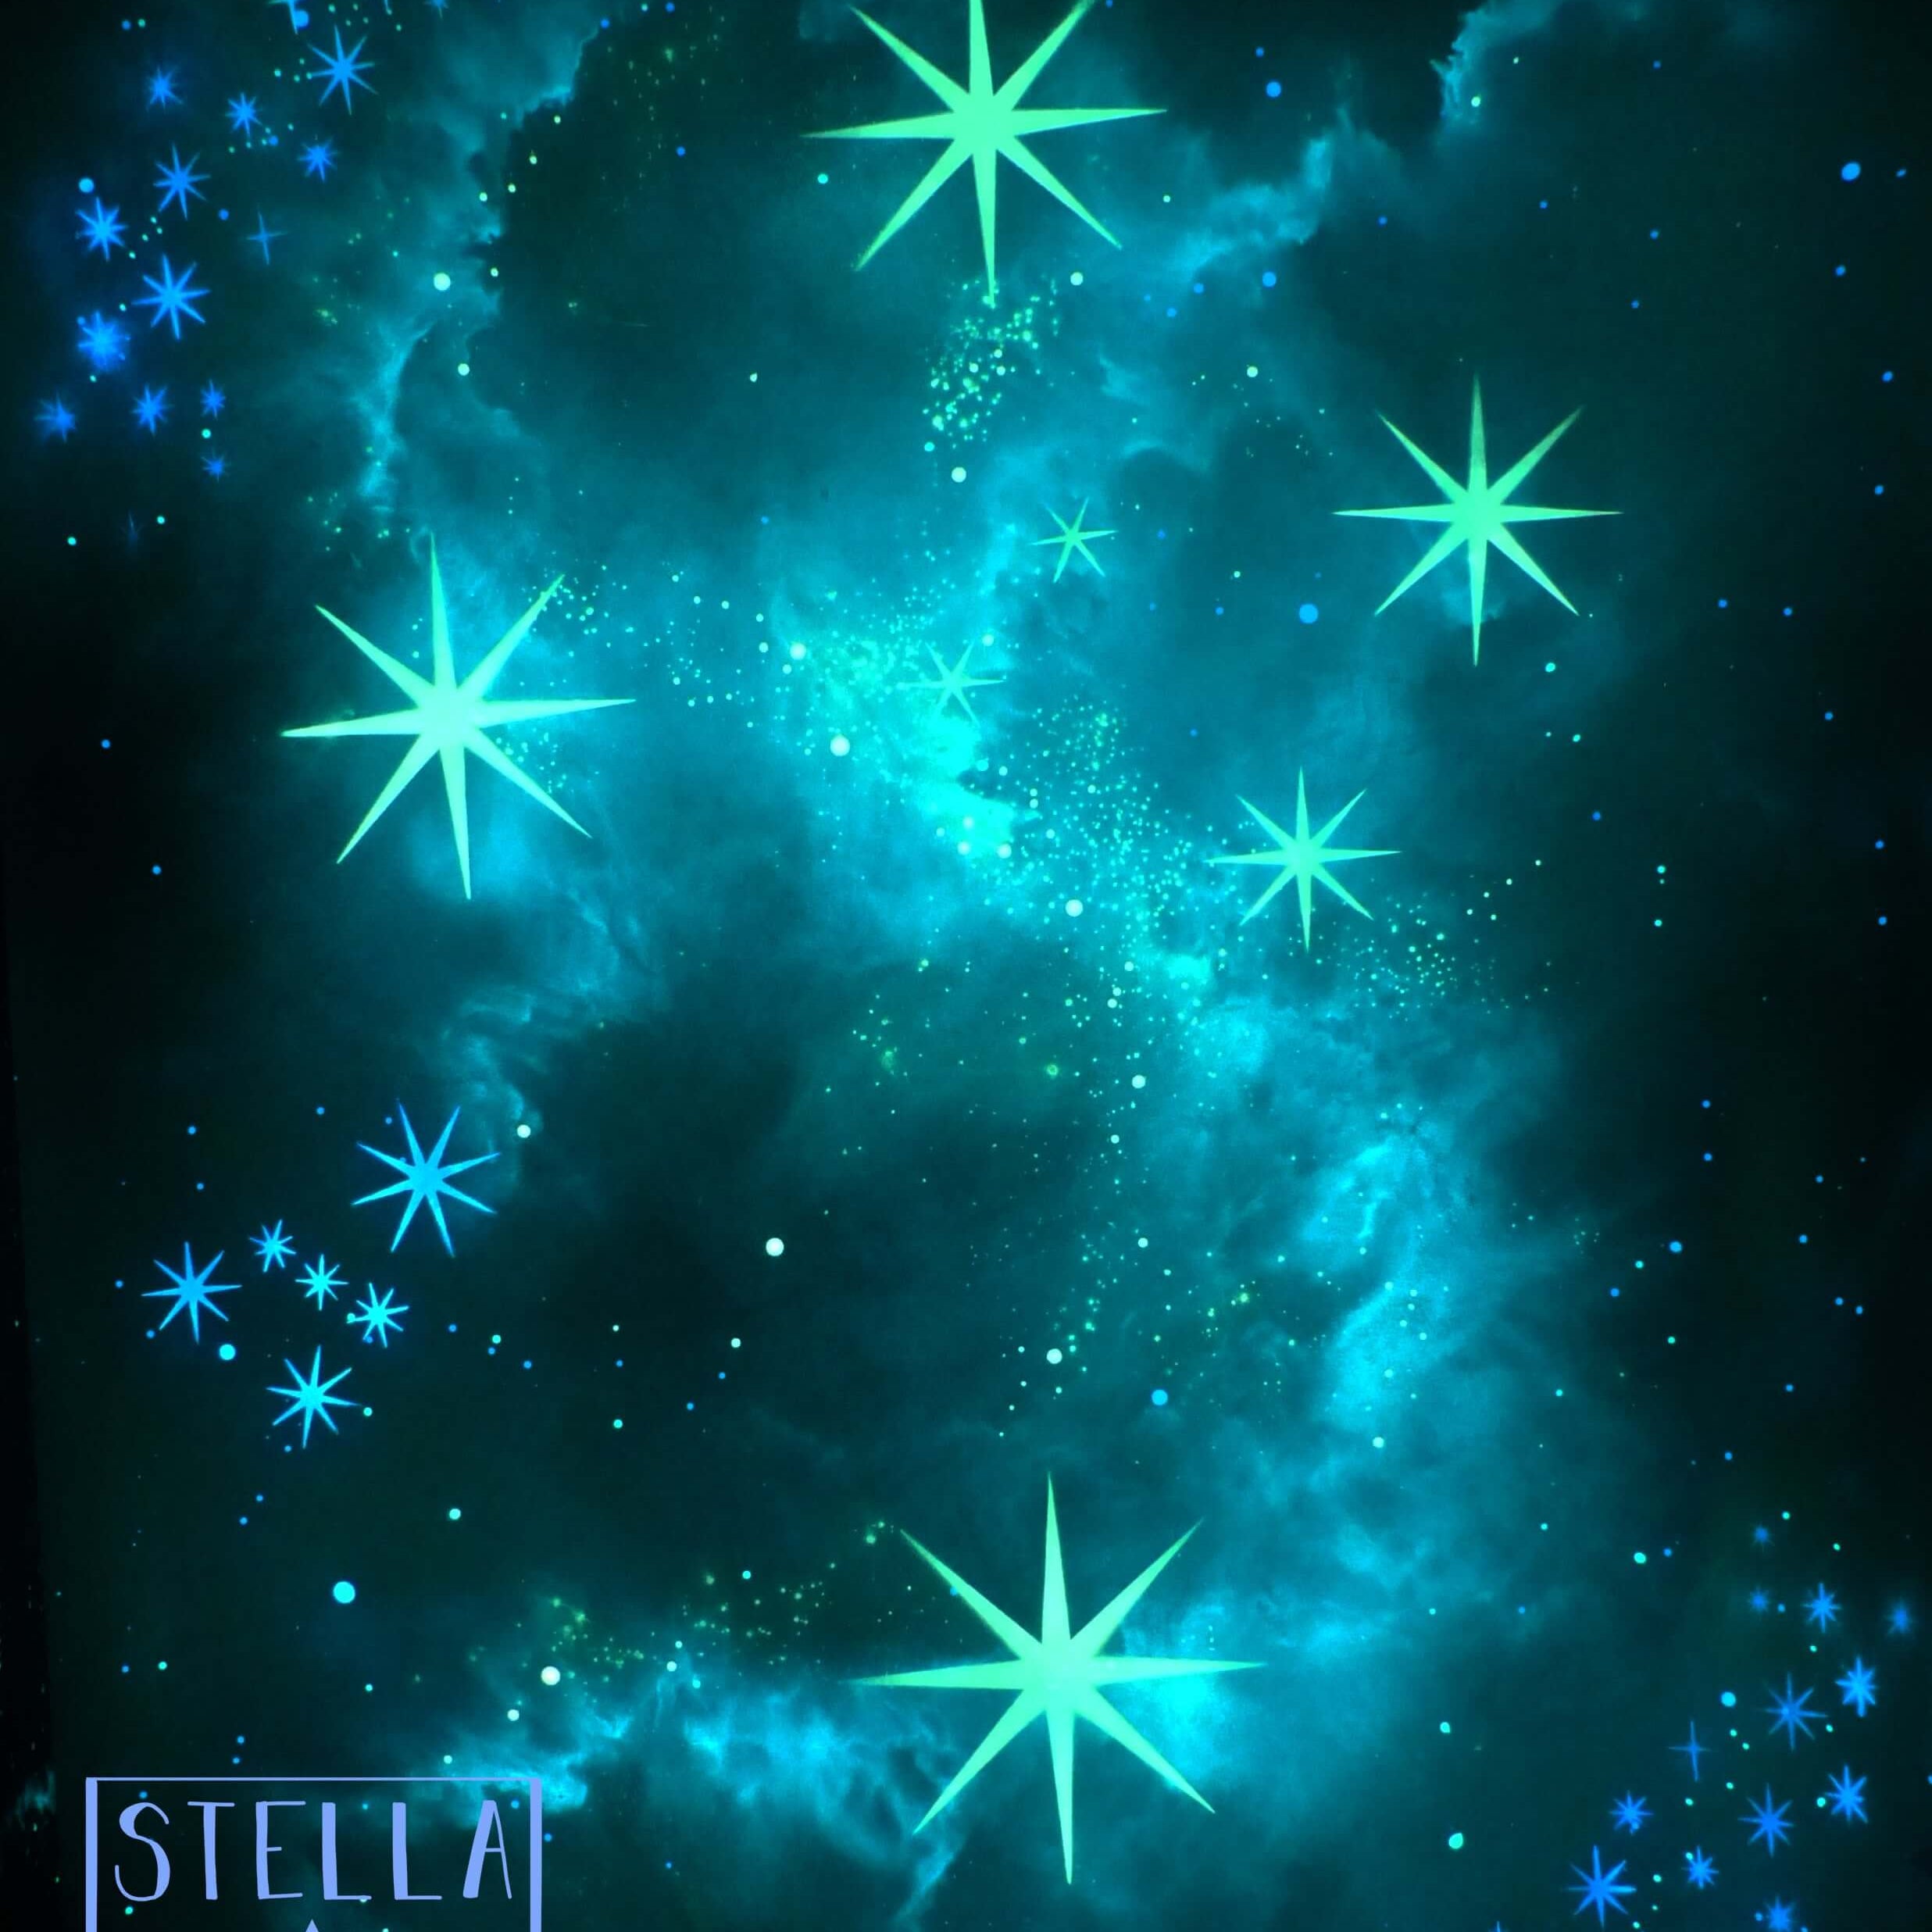 Southern Cross constellation glow-in-the-dark wall mural: A radiant depiction of the iconic star pattern, glowing in the dark.